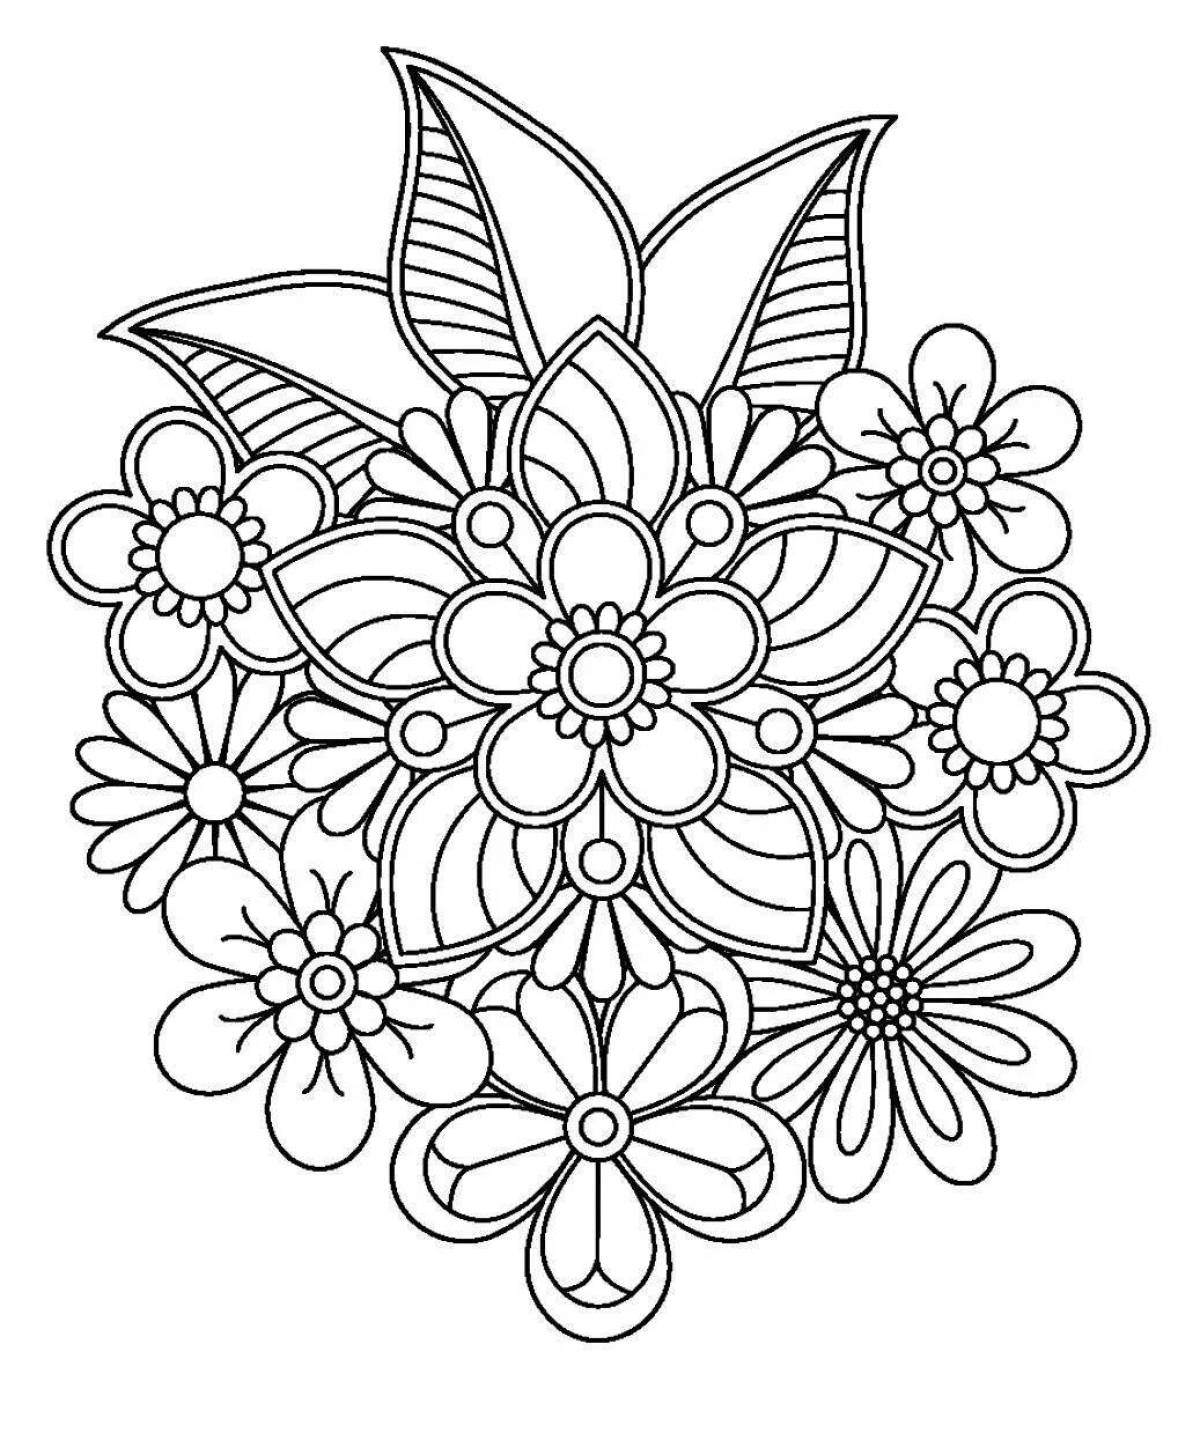 Fancy patterns and ornaments for coloring